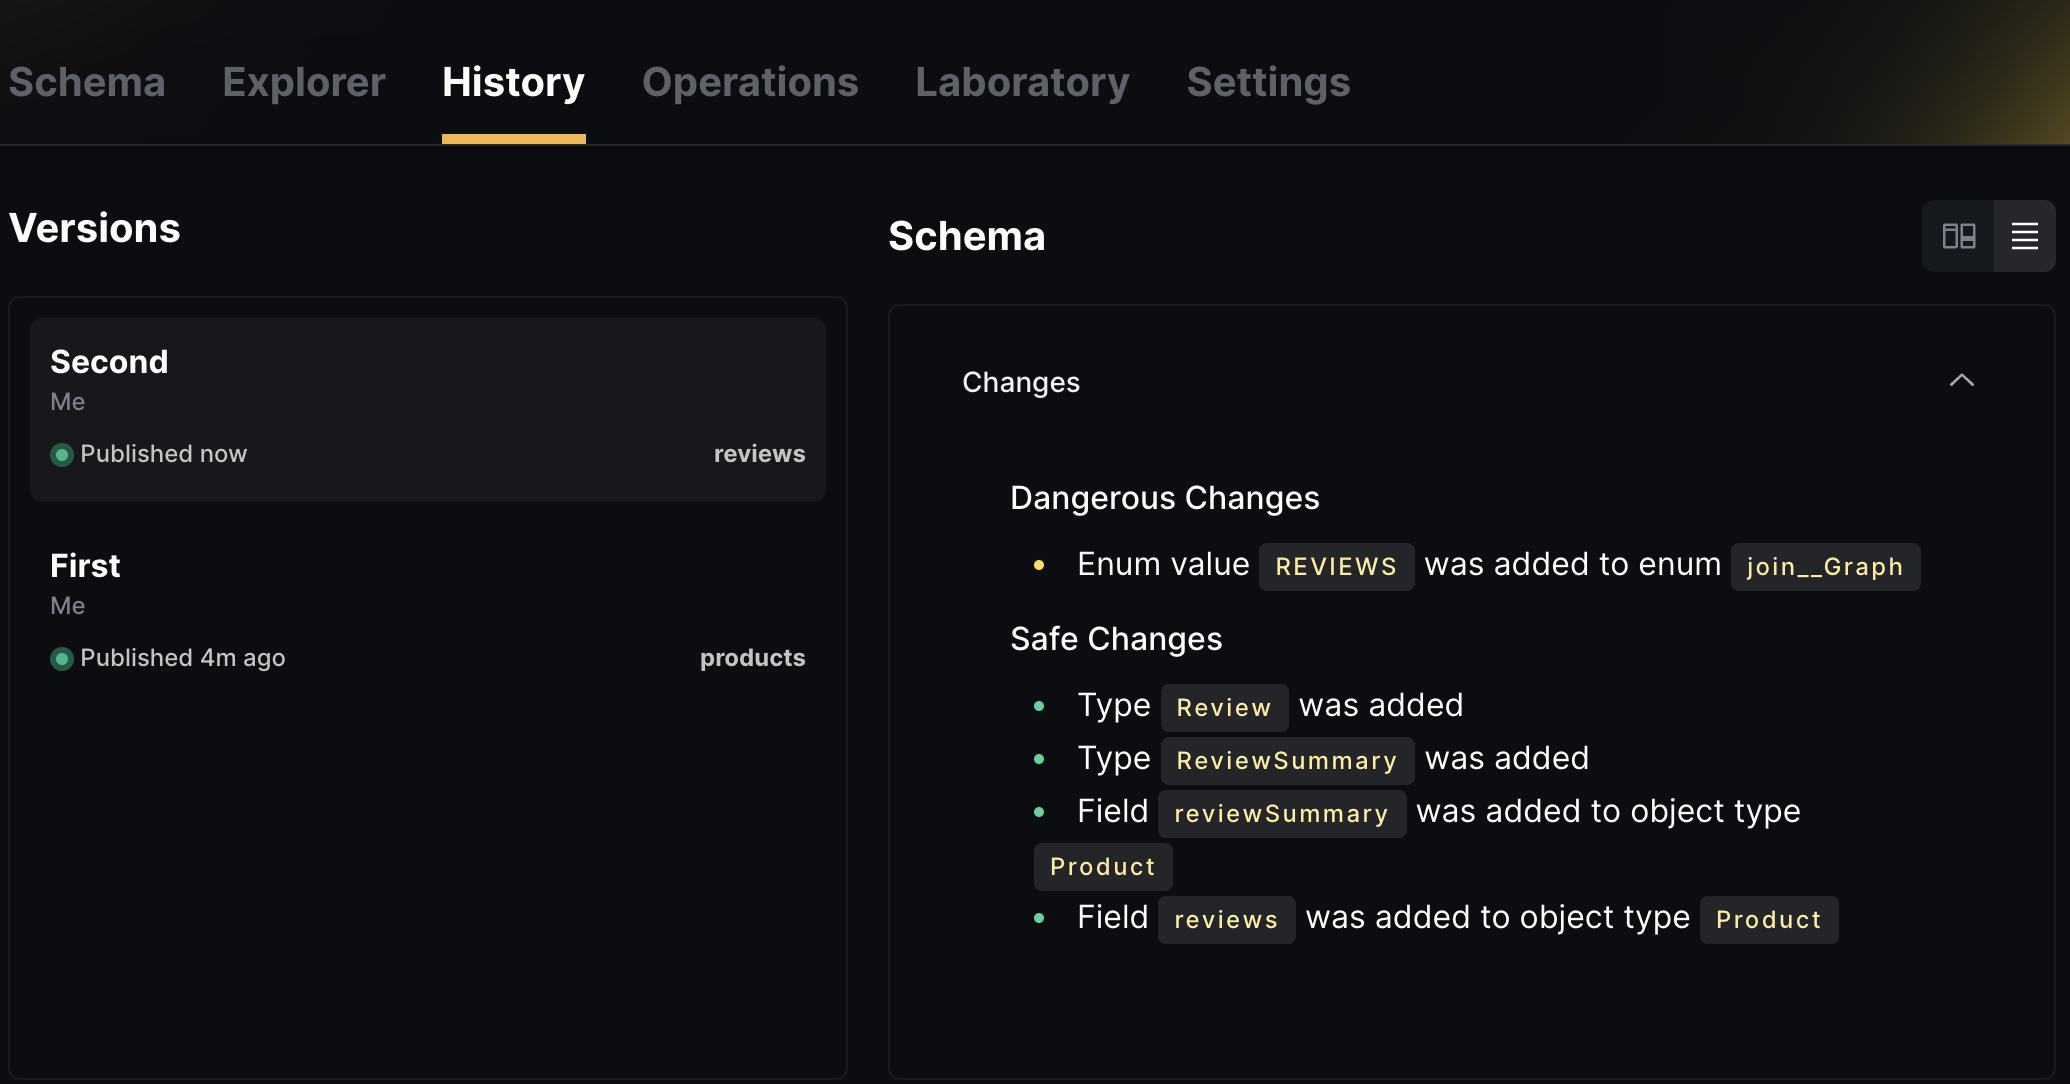 Schema Explorer for Federation Projects